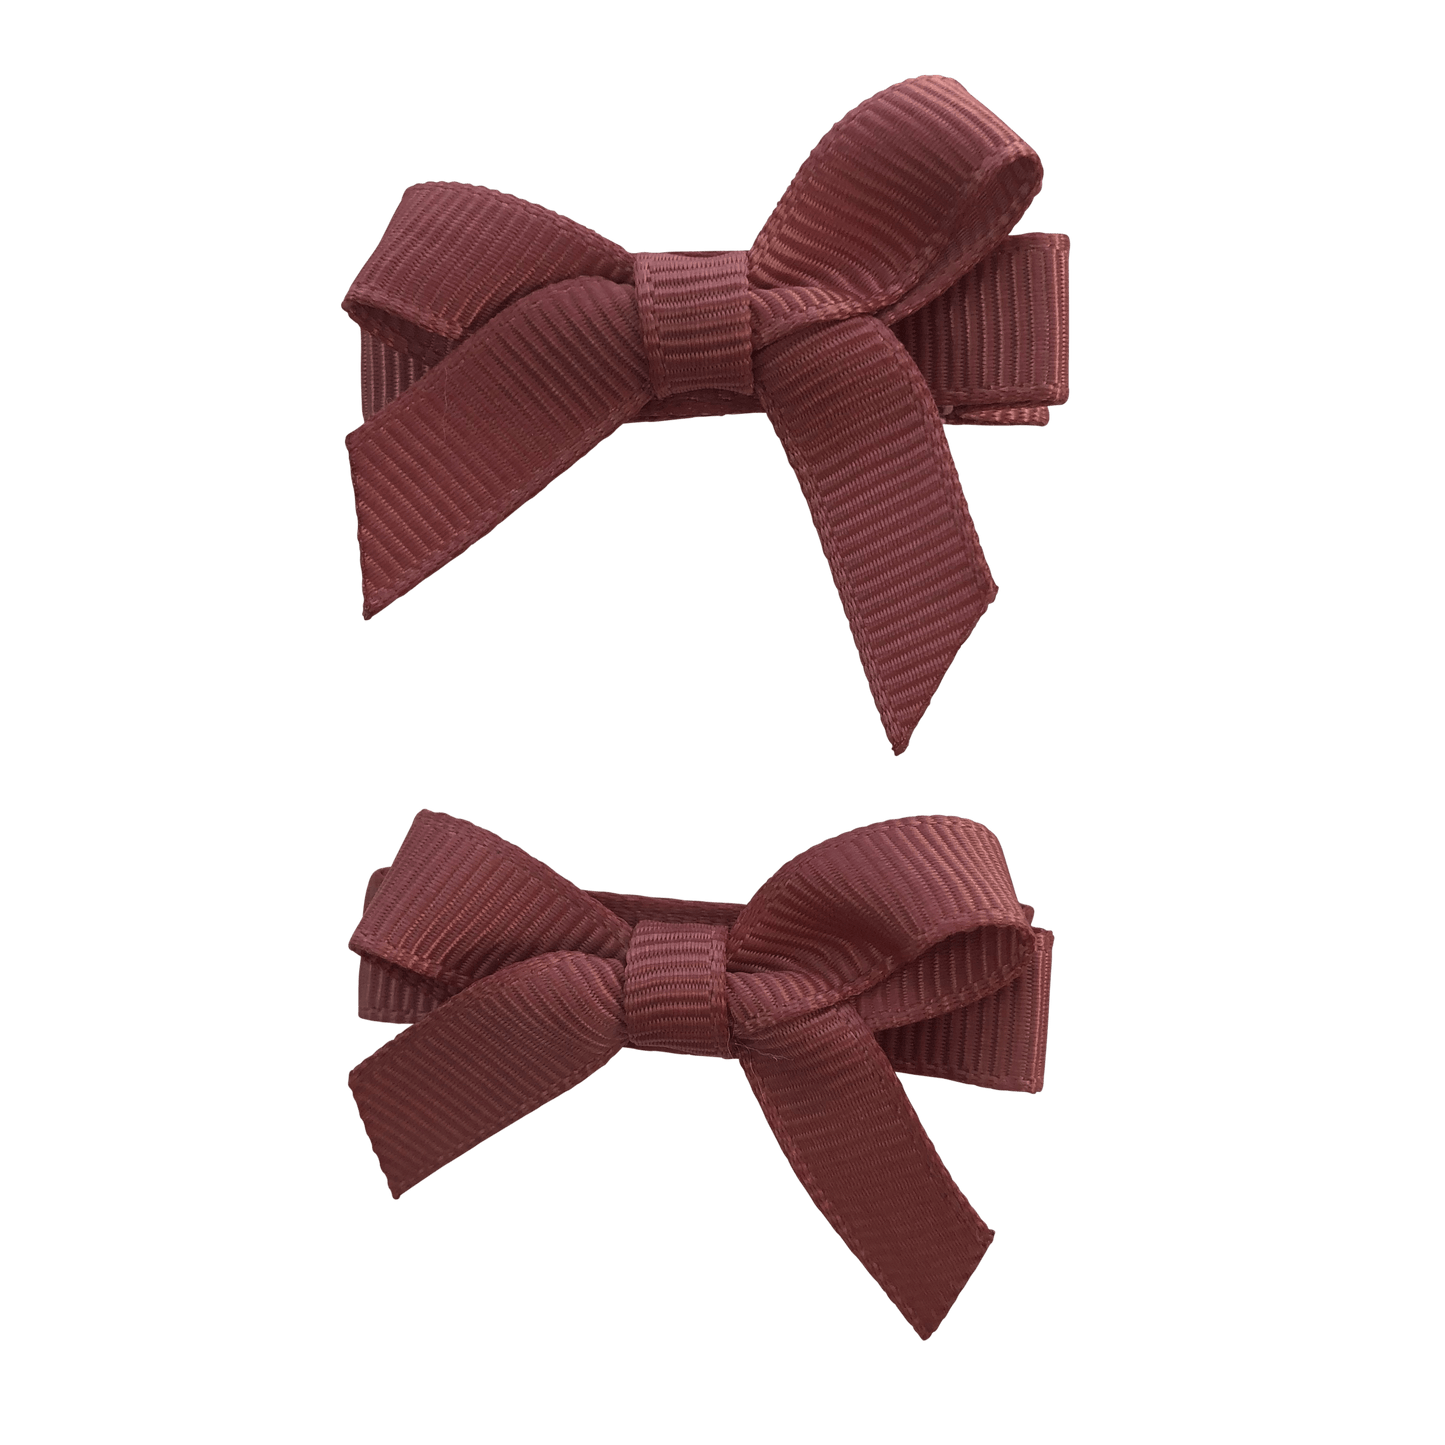 Victorian Rose Hair Accessories - Assorted Hair Accessories - School Uniform Hair Accessories - Ponytails and Fairytales